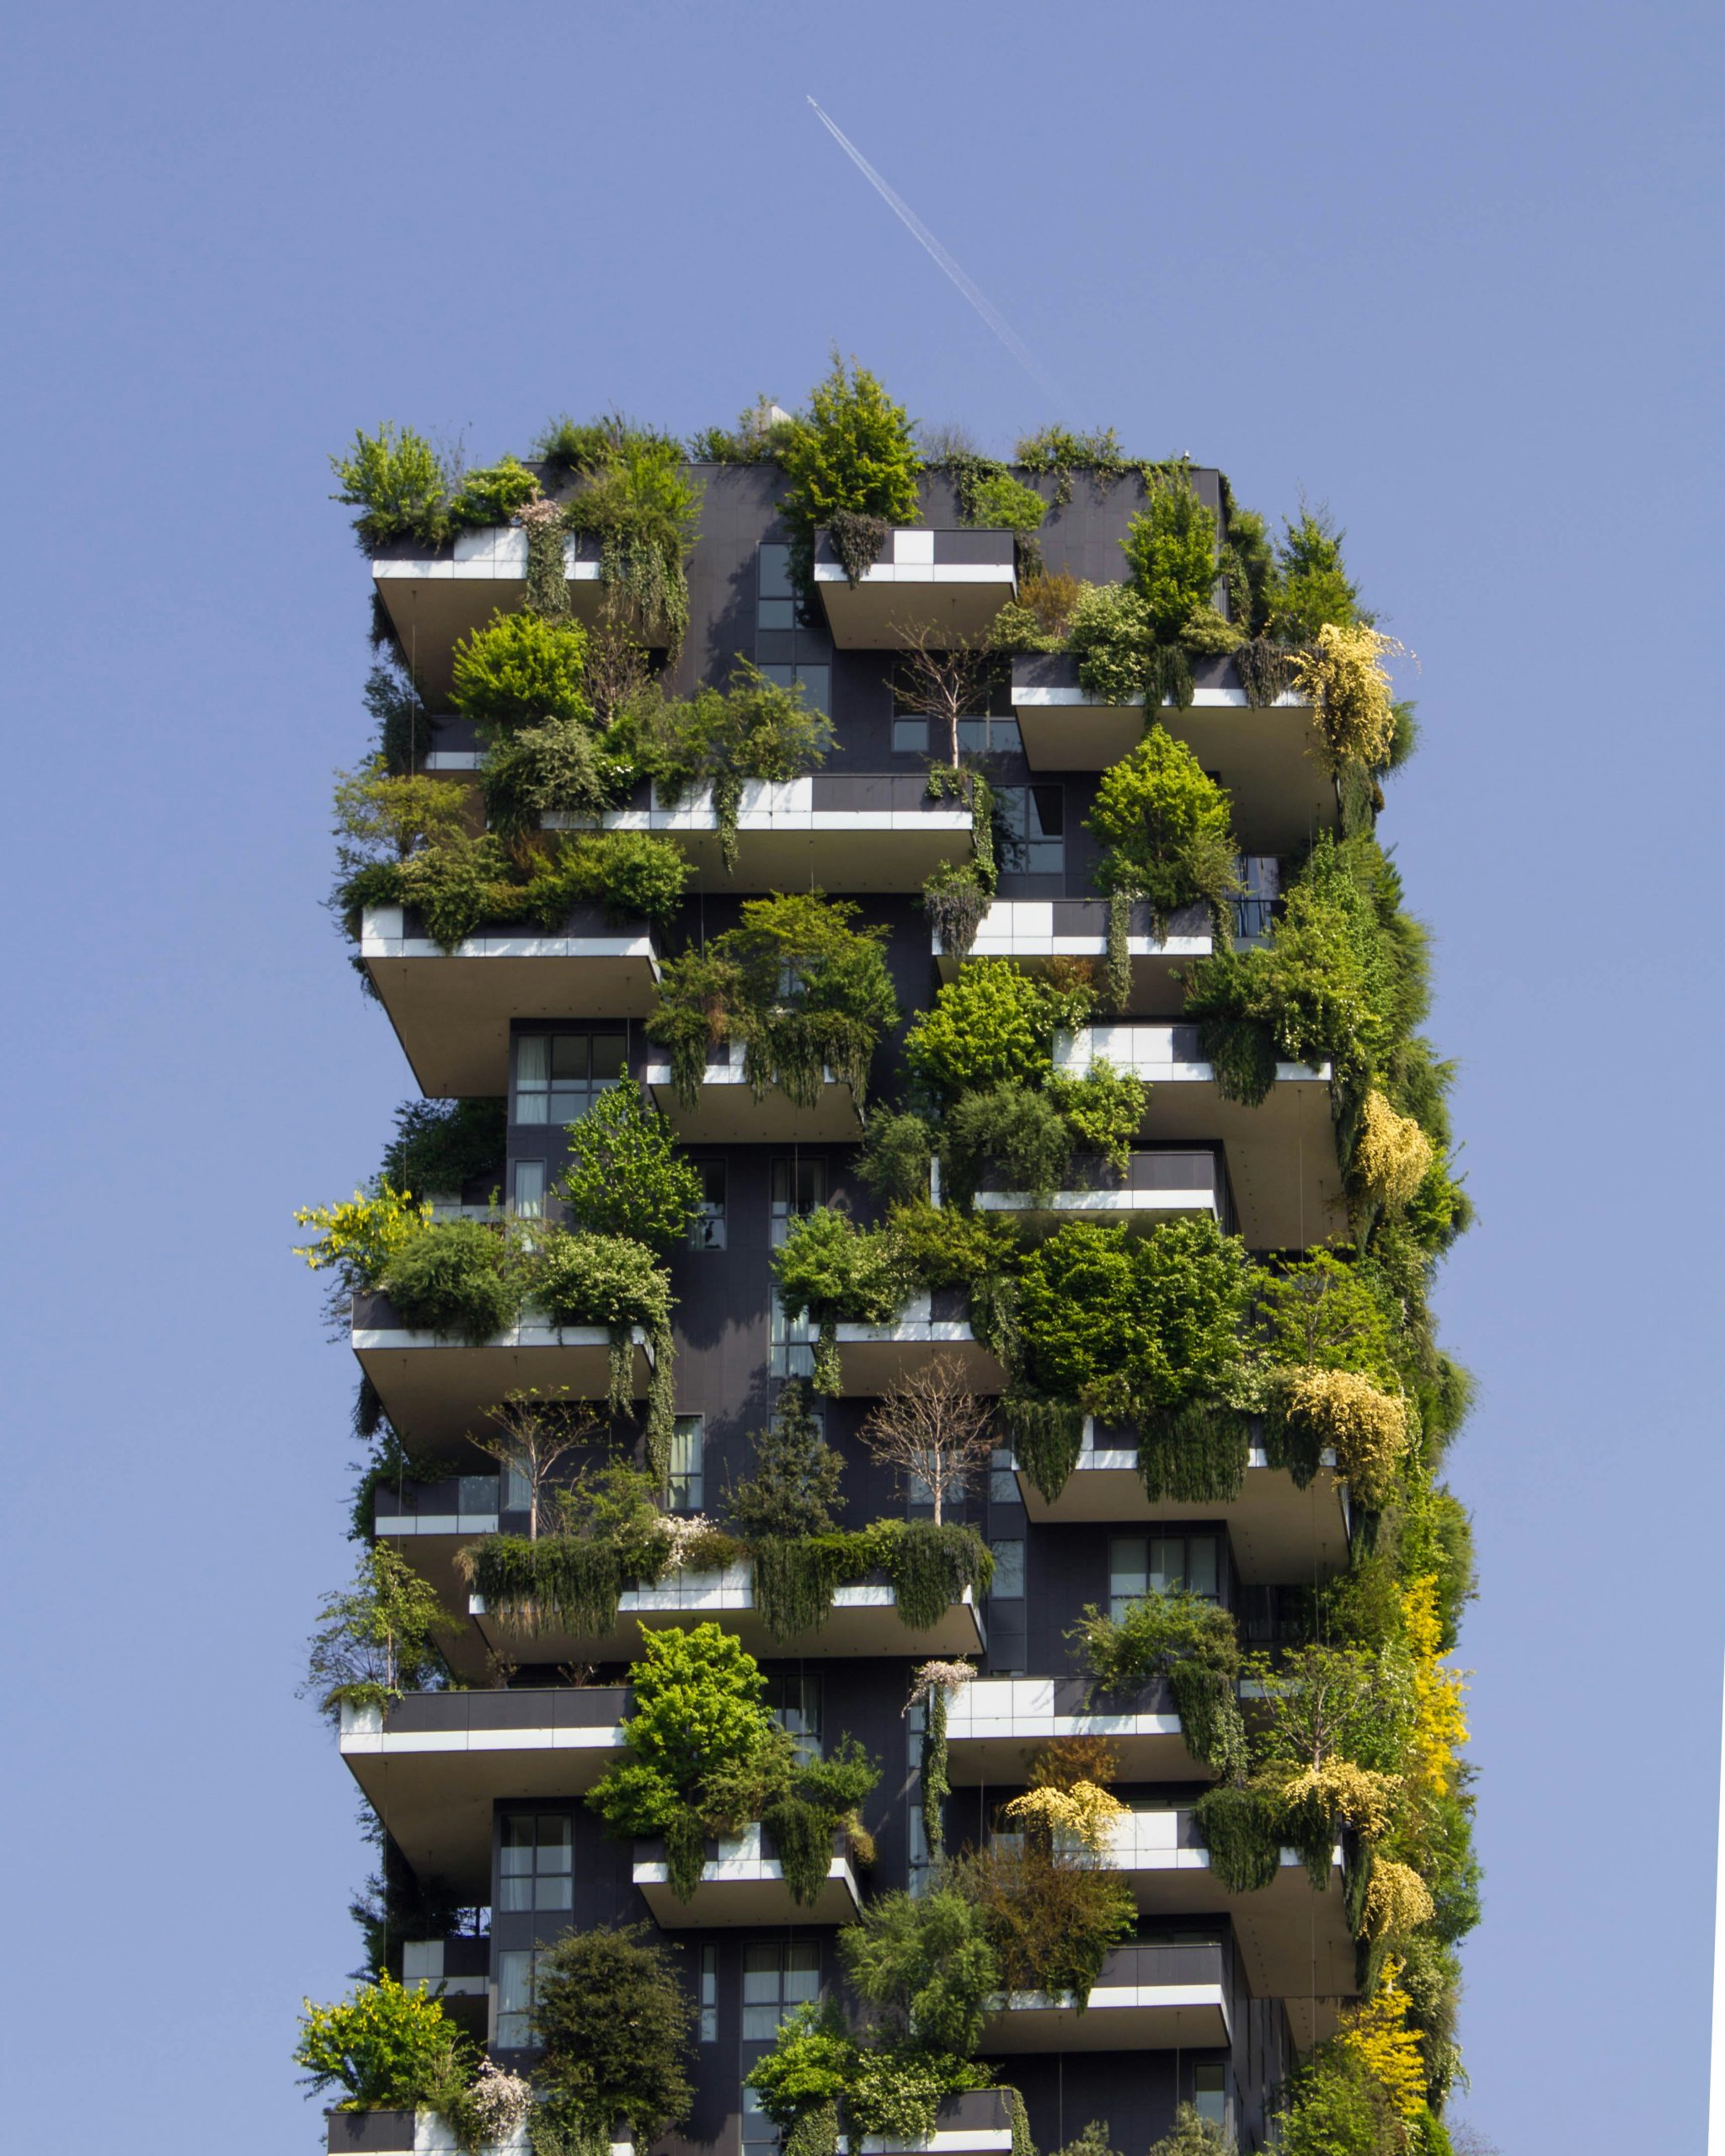 How Do Green Building Certifications Impact Sustainable Architecture?